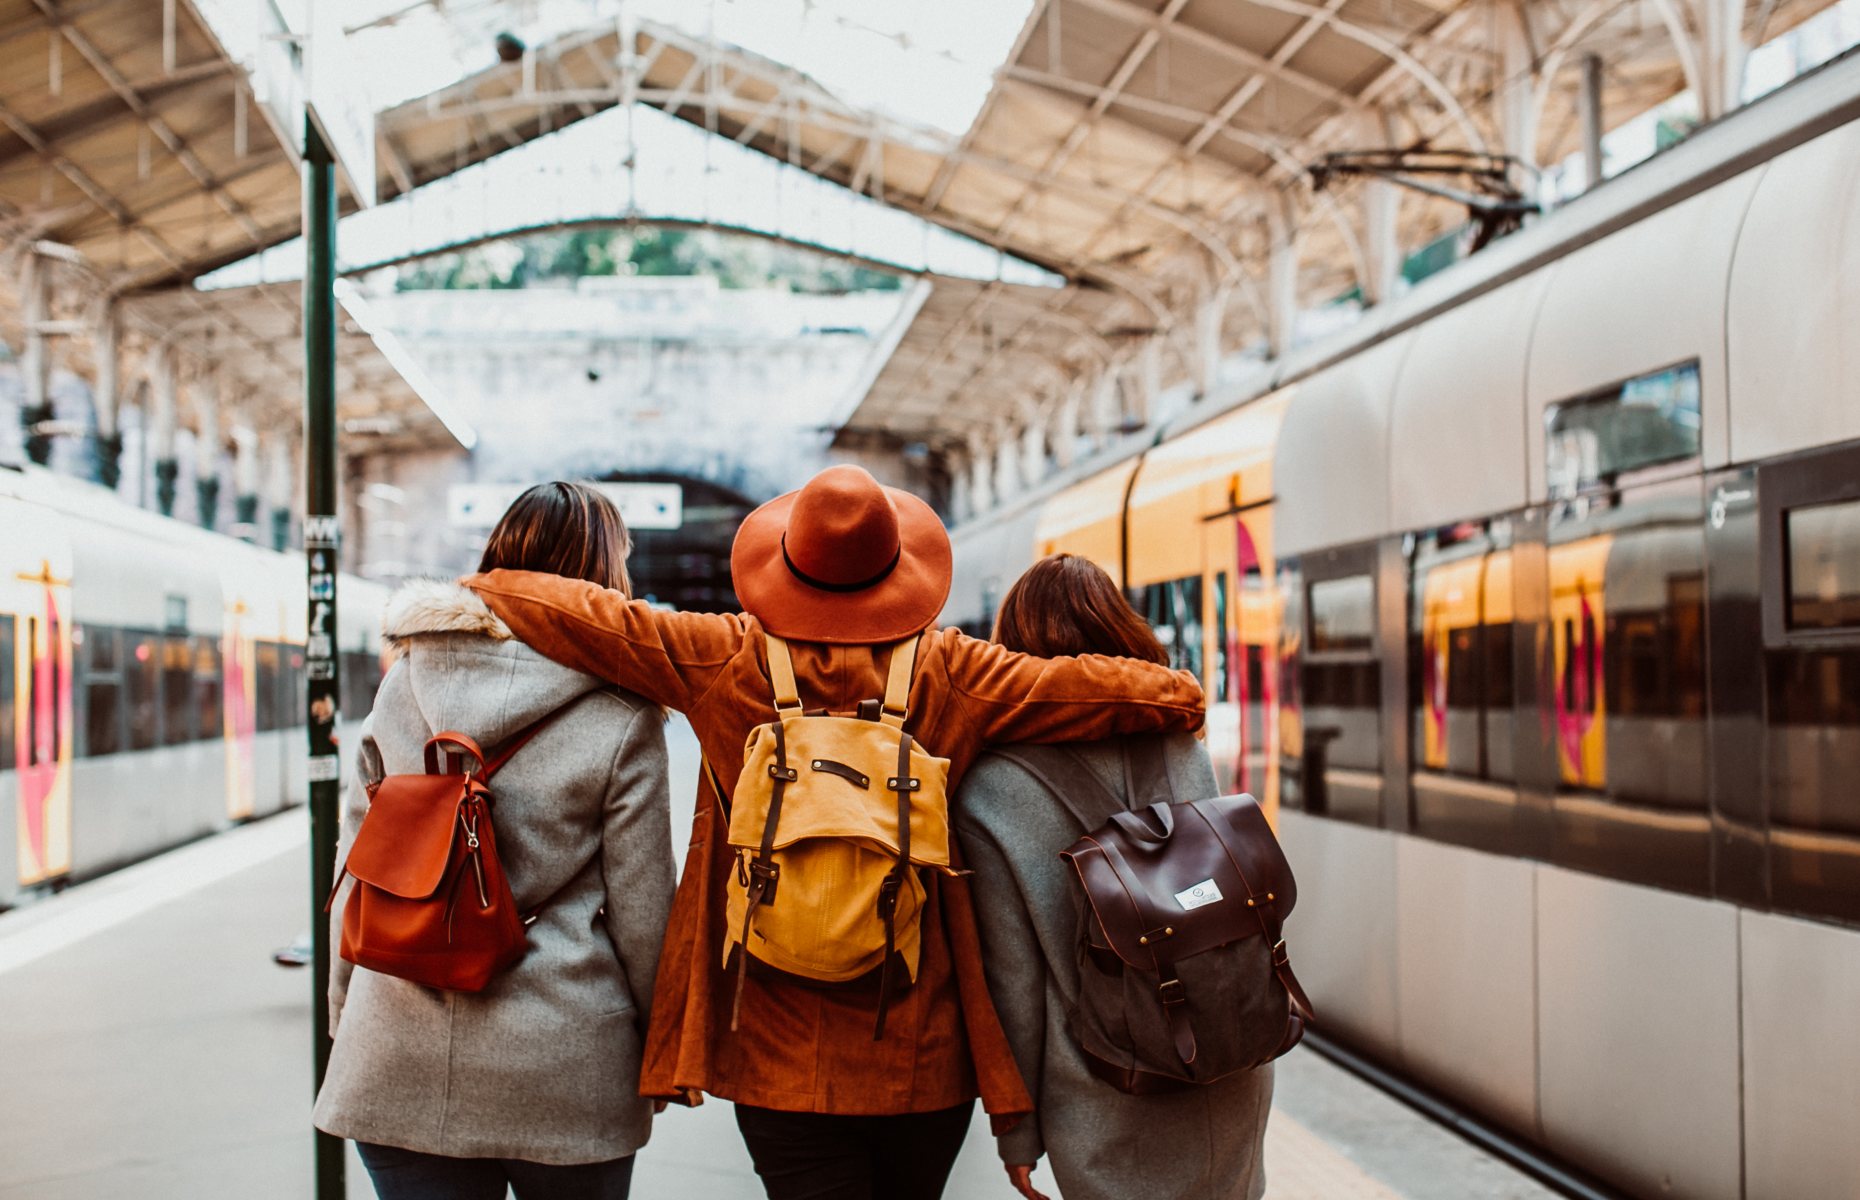 Group of friends at a train station (Image: Lucia Romero/Shutterstock)